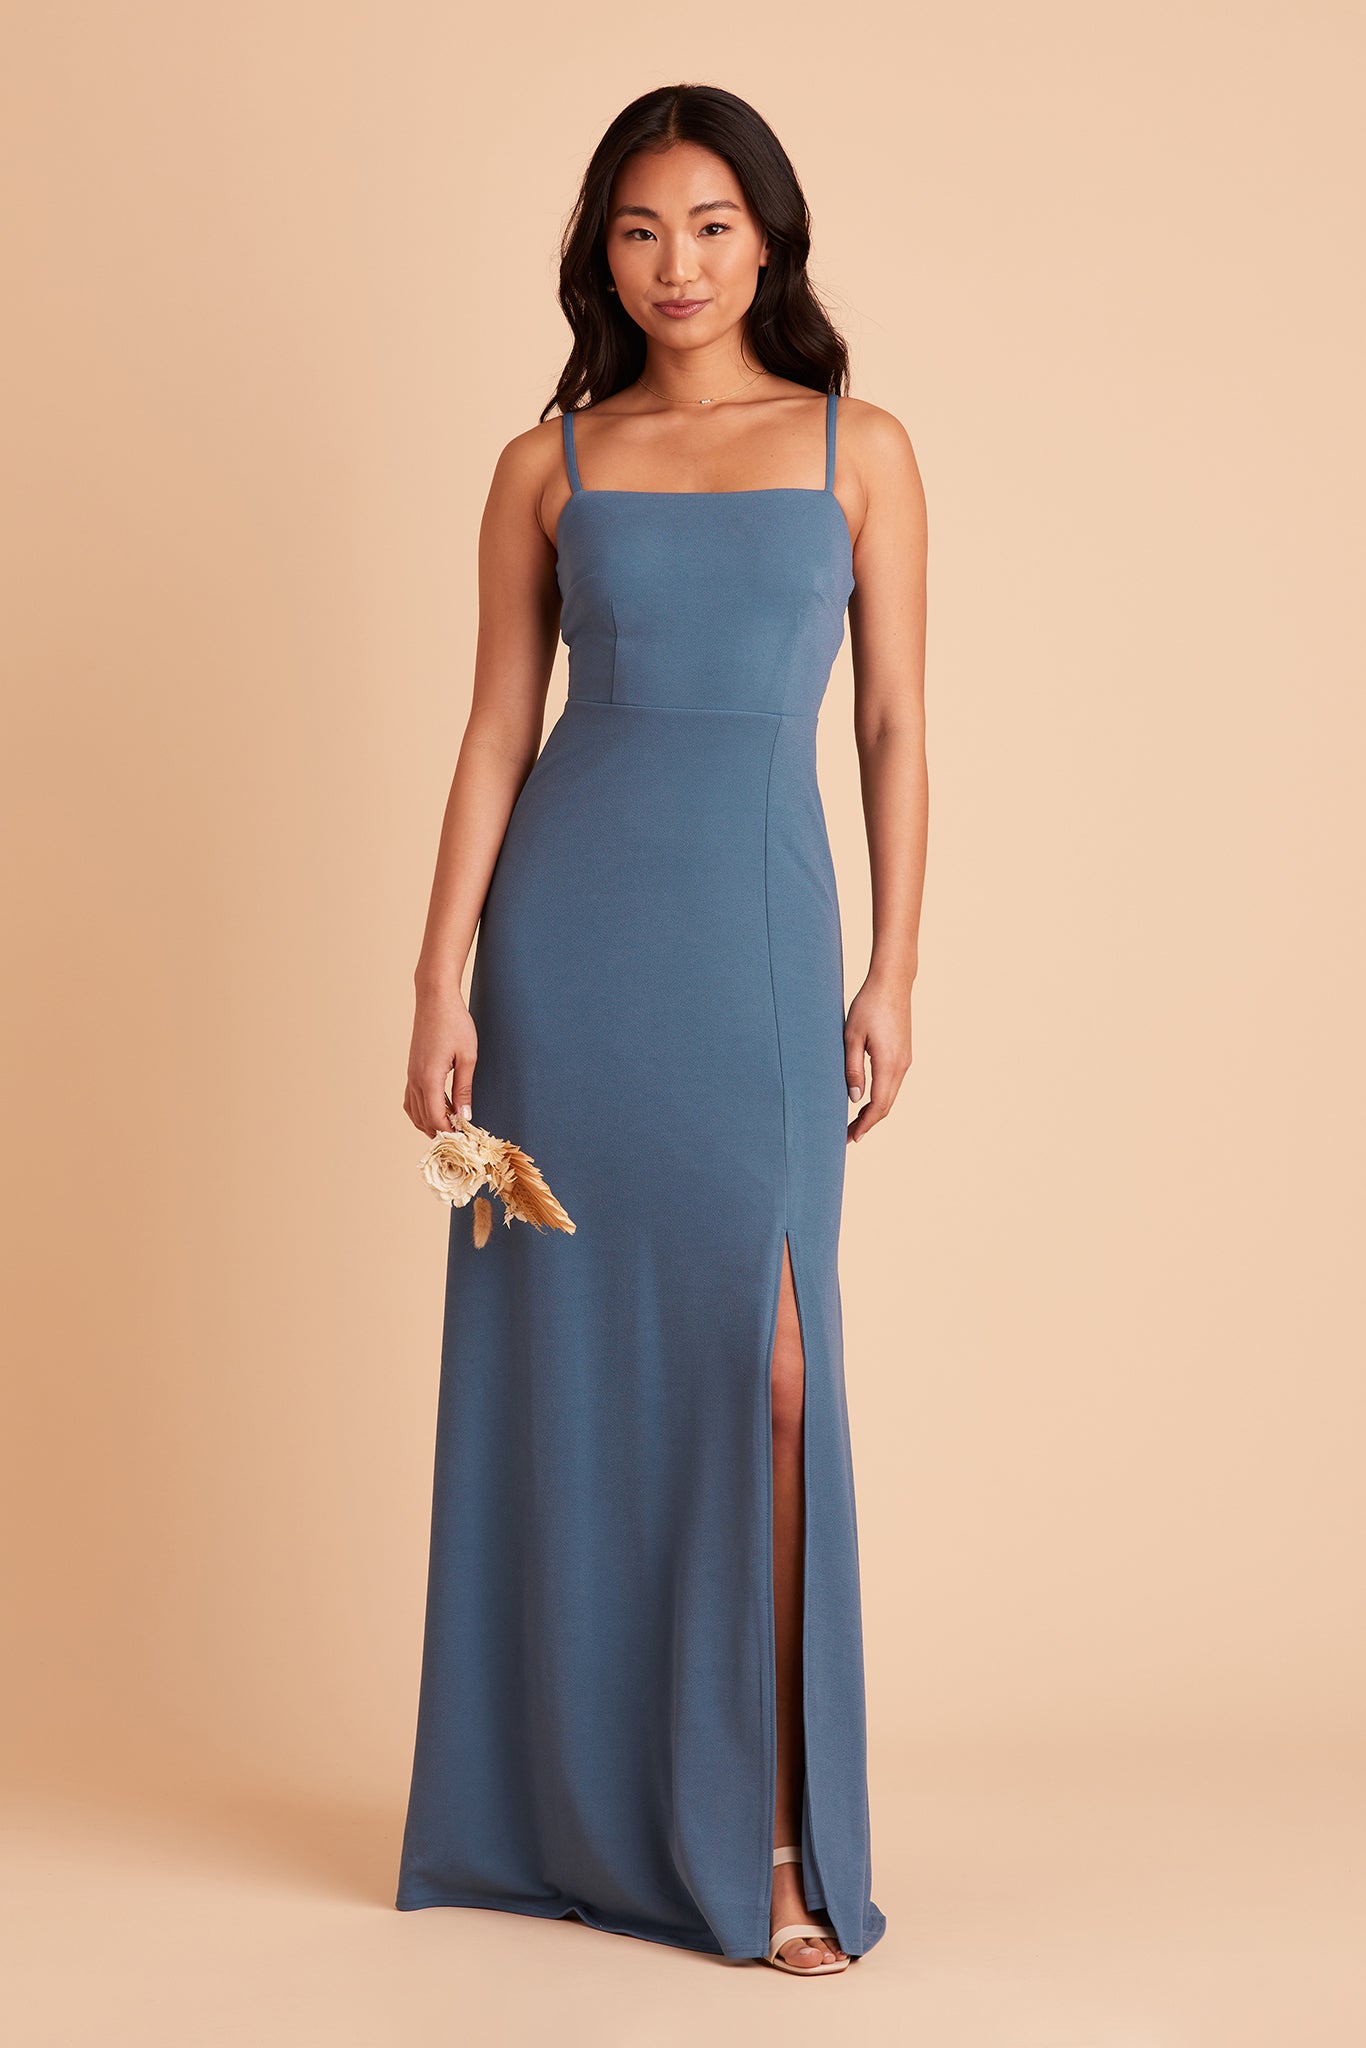 Benny bridesmaid dress in twilight crepe by Birdy Grey, front view